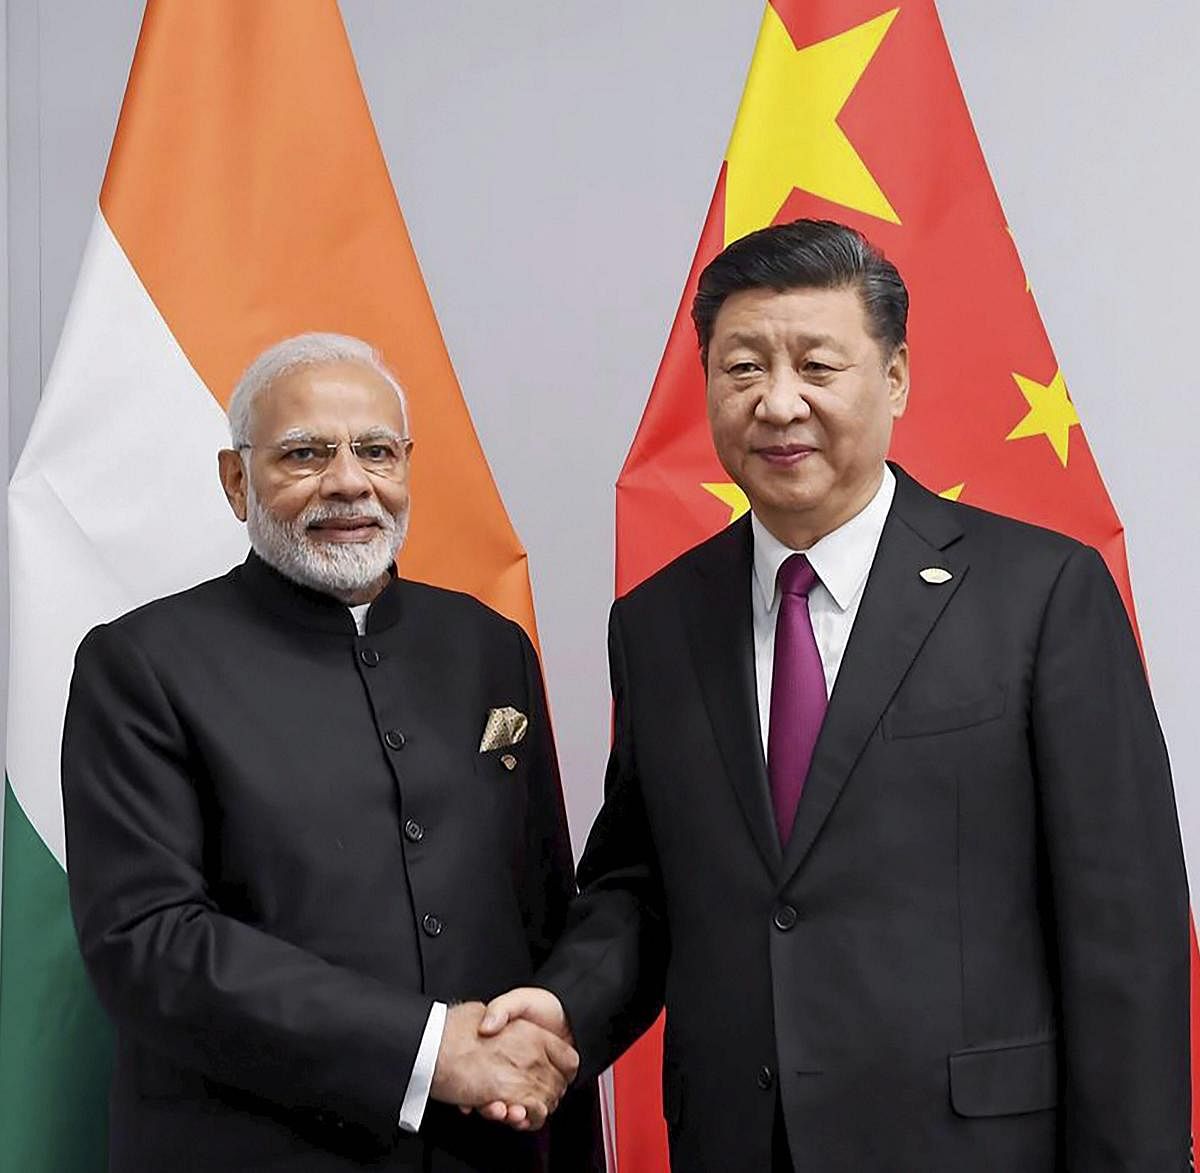 Prime Minister Narendra Modi shakes hands with Chinese President Xi Jinping on the sidelines of G-20 summit, in Buenos Aires. PTI Photo